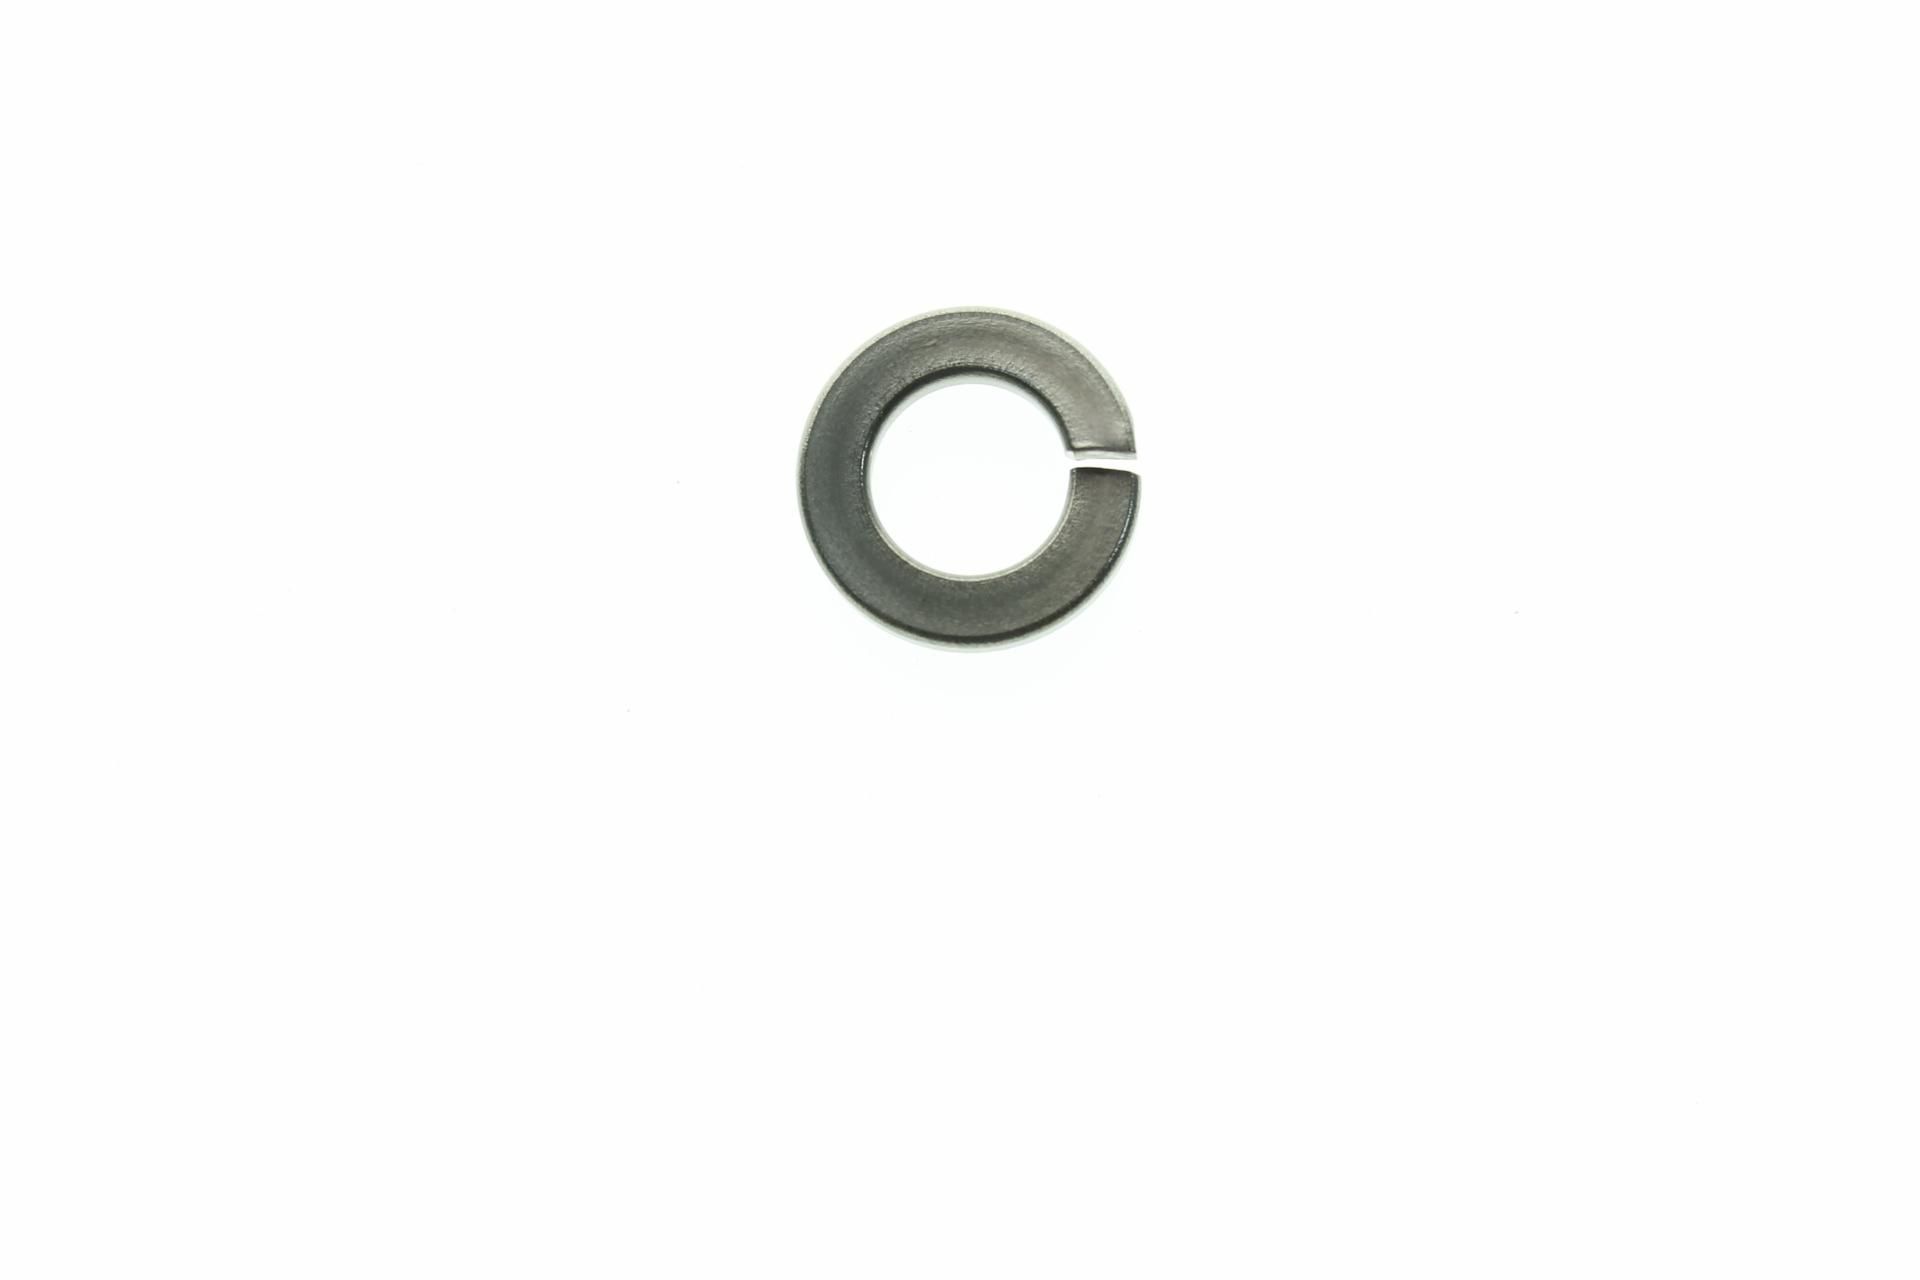 164-81256-20-00 Superseded by 92990-08100-00 - WASHER,SPRING